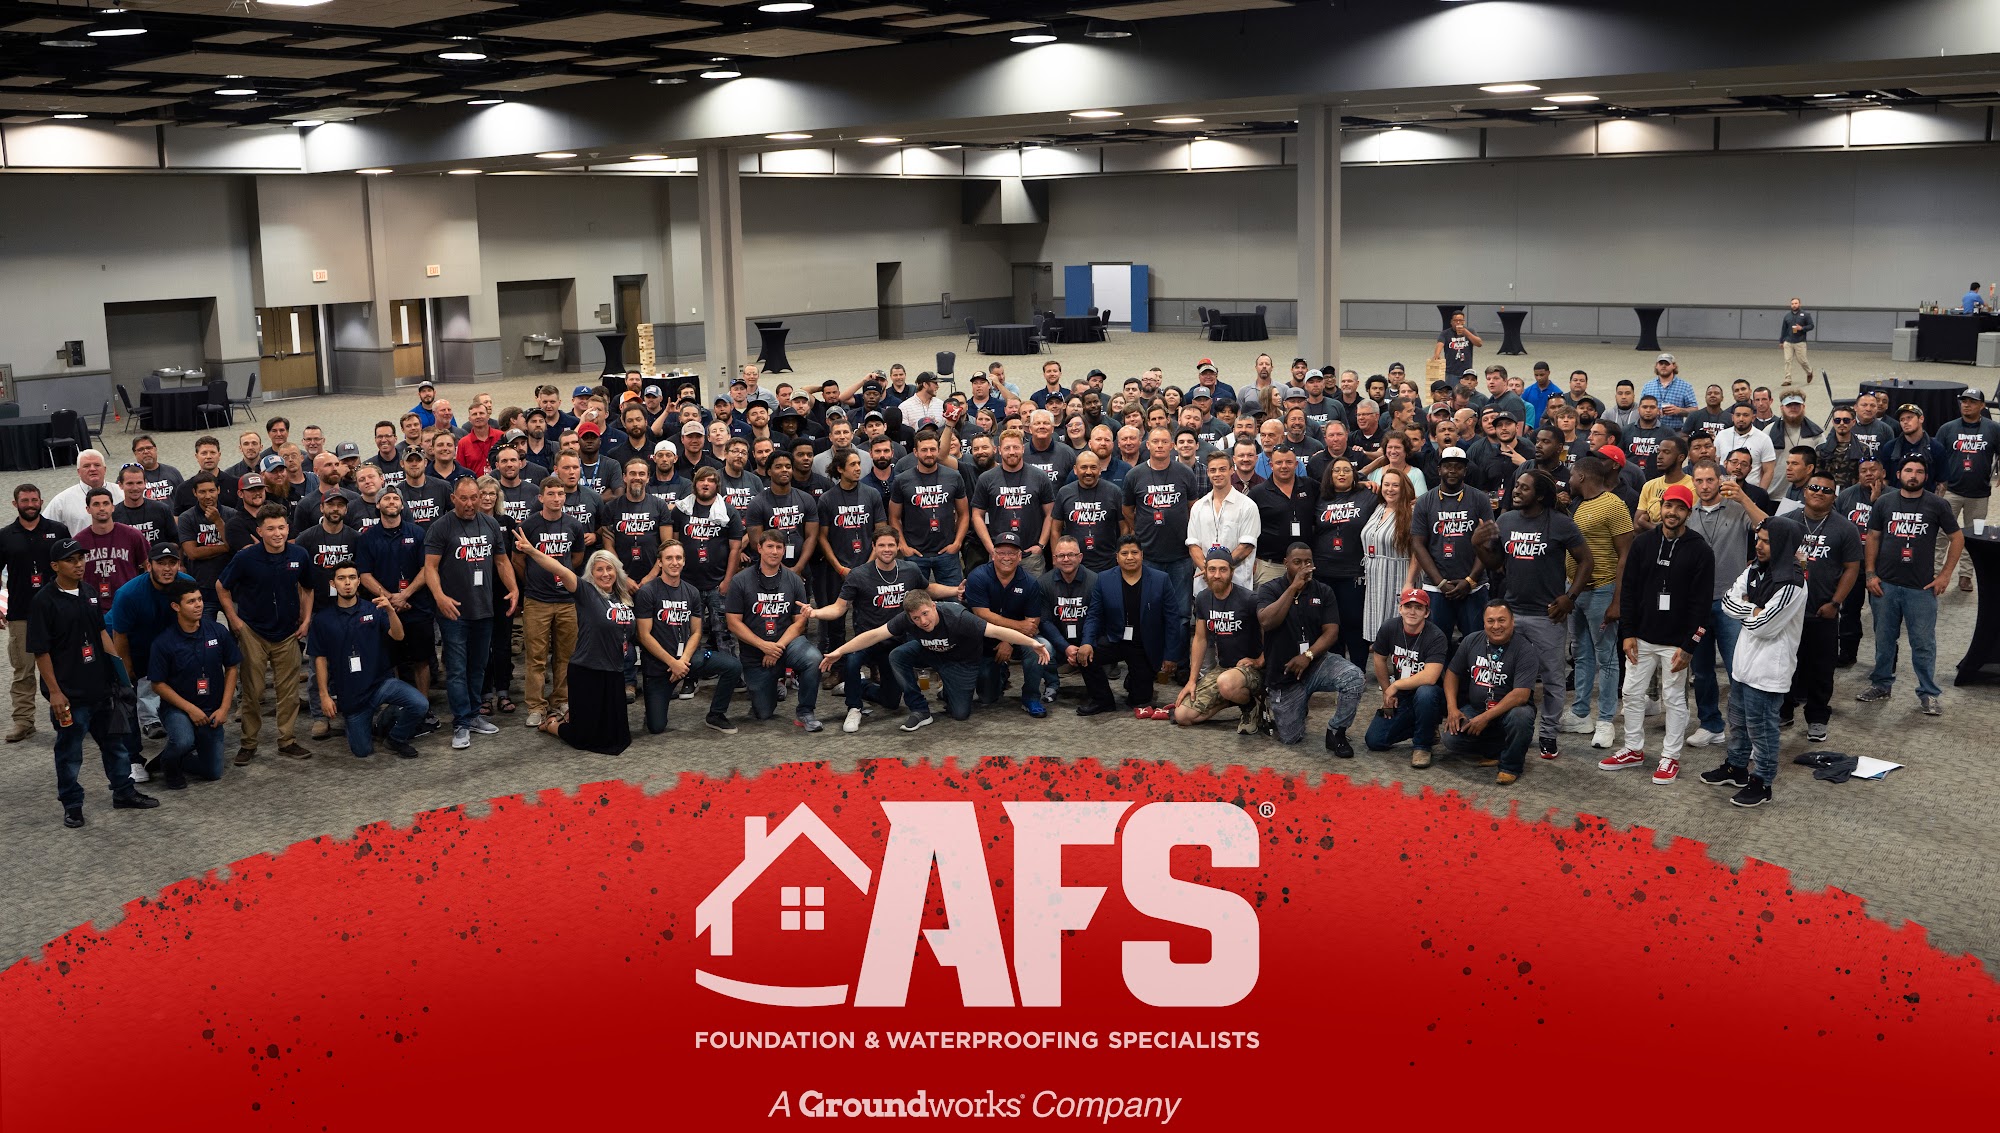 AFS Foundation & Waterproofing Specialists 214 Industrial Park Dr, Soddy-Daisy Tennessee 37379